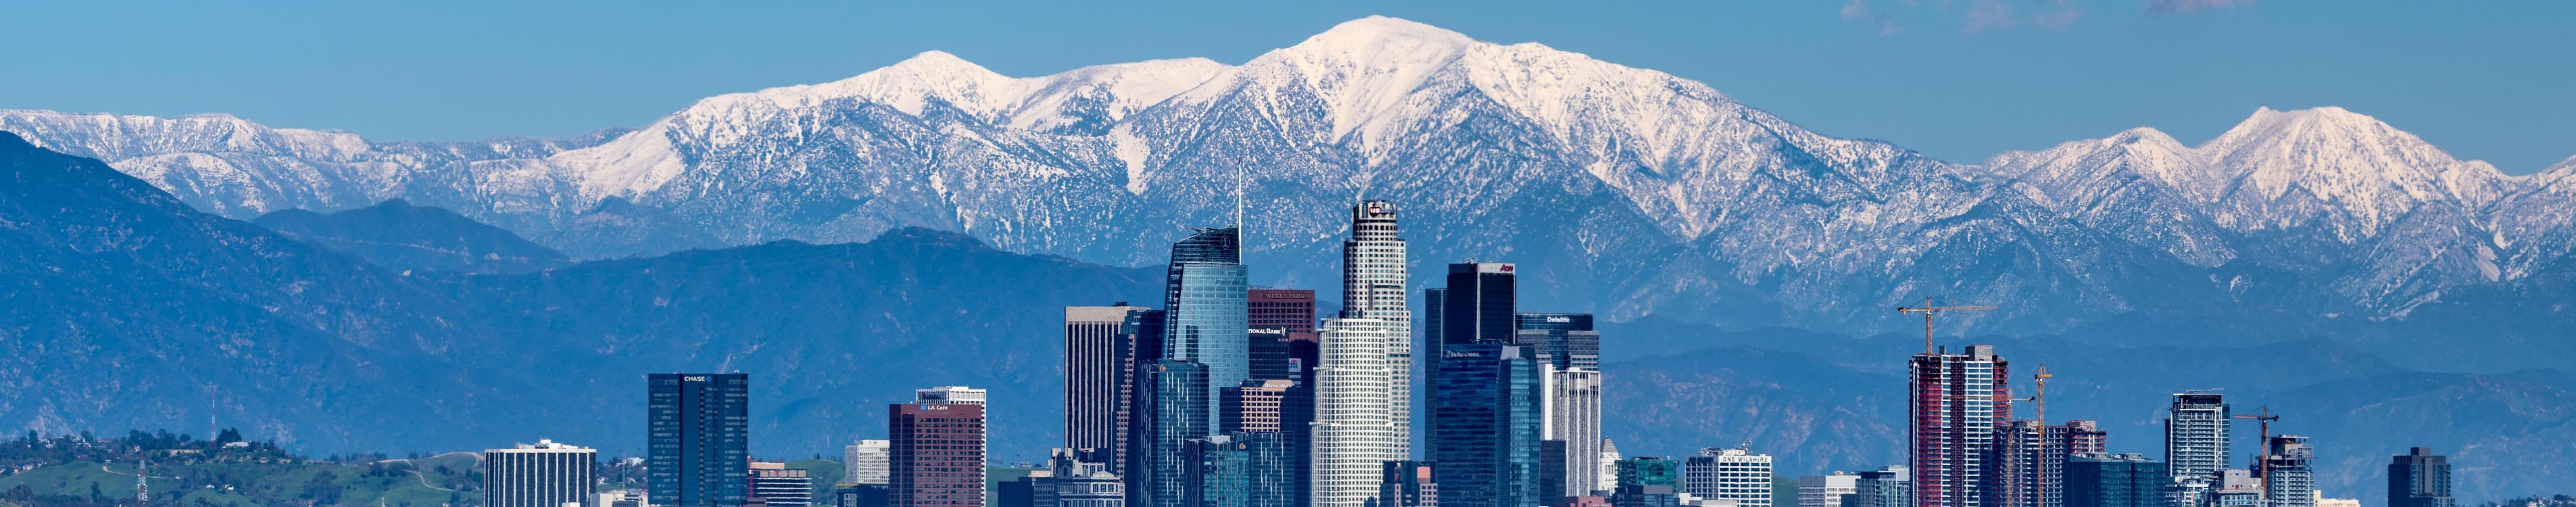 Skyline of Los Angeles with the Sierra Nevada Mountains in the background